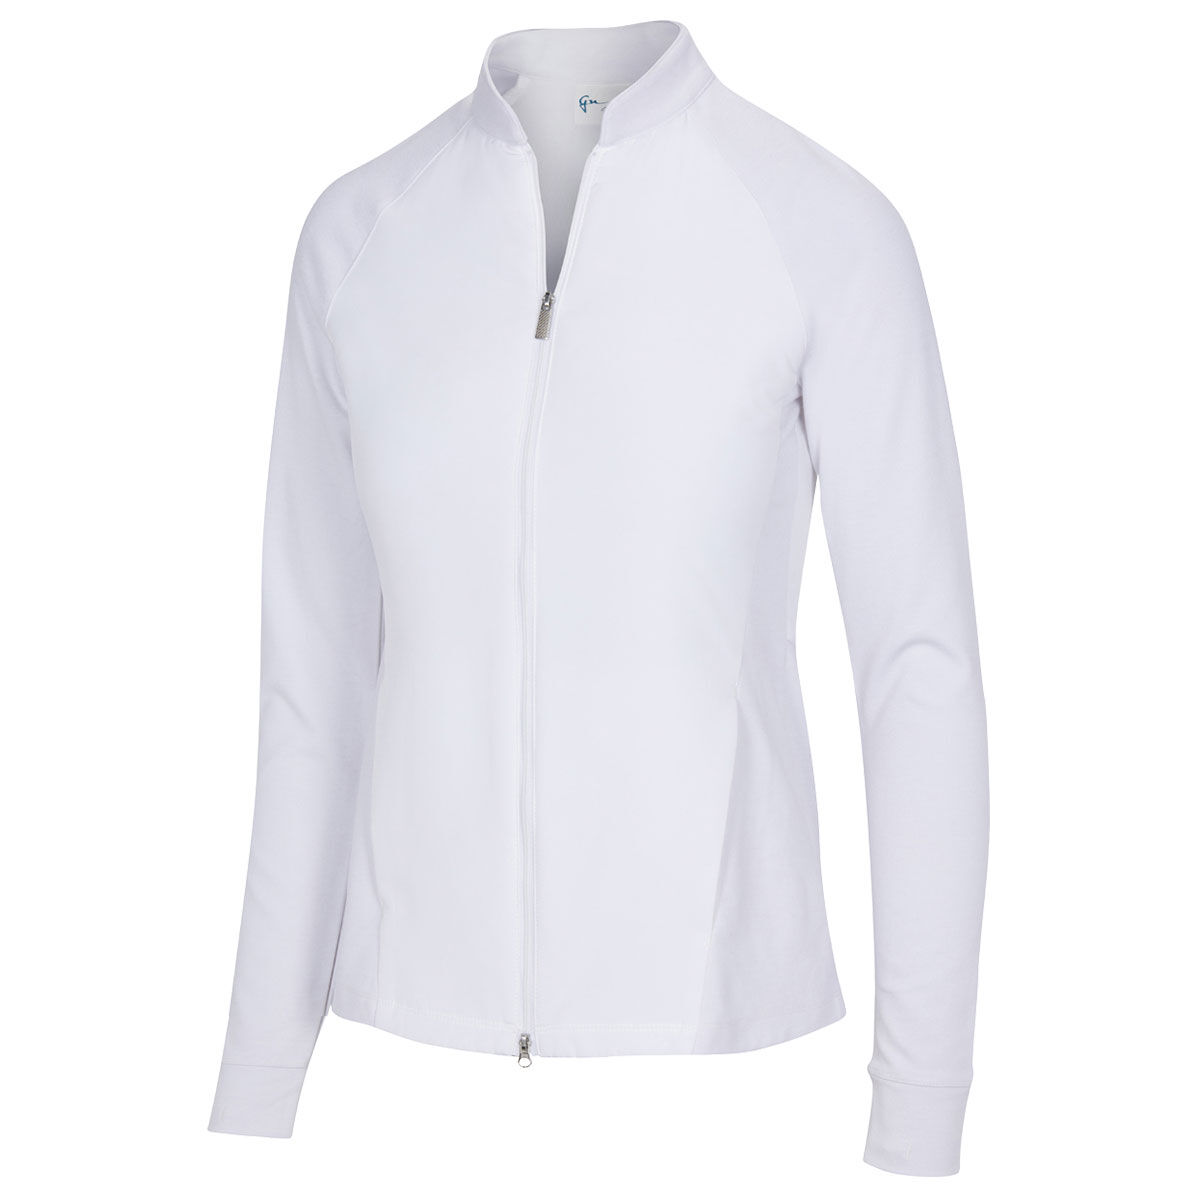 Greg Norman Women's White Mix Media Golf Jacket, Size: XS | American Golf - Father's Day Gift von Greg Norman